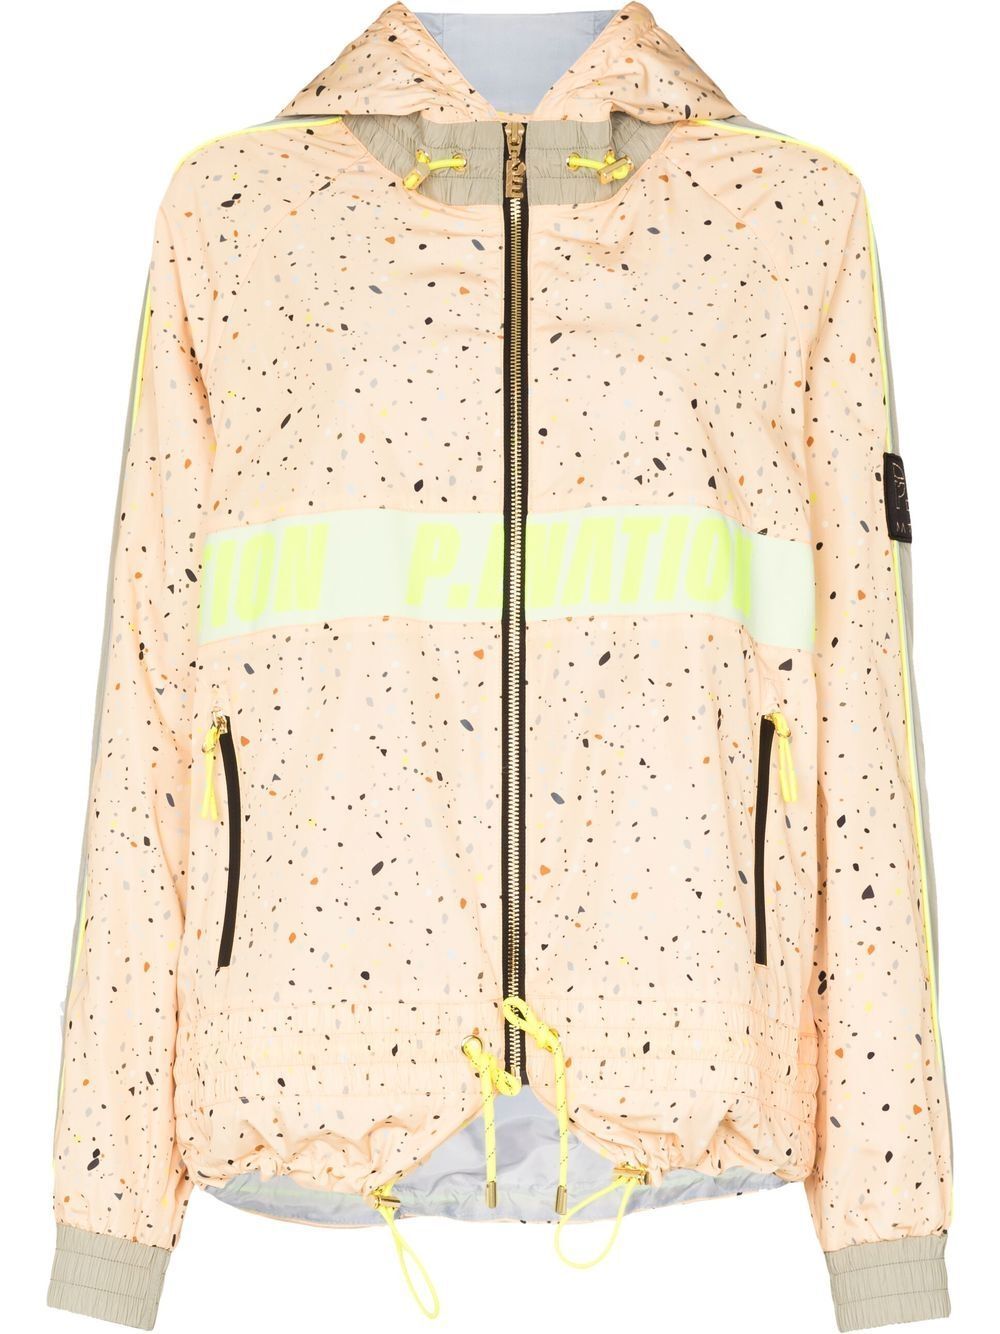 P.E Nation spray paint-effect jacket - Yellow